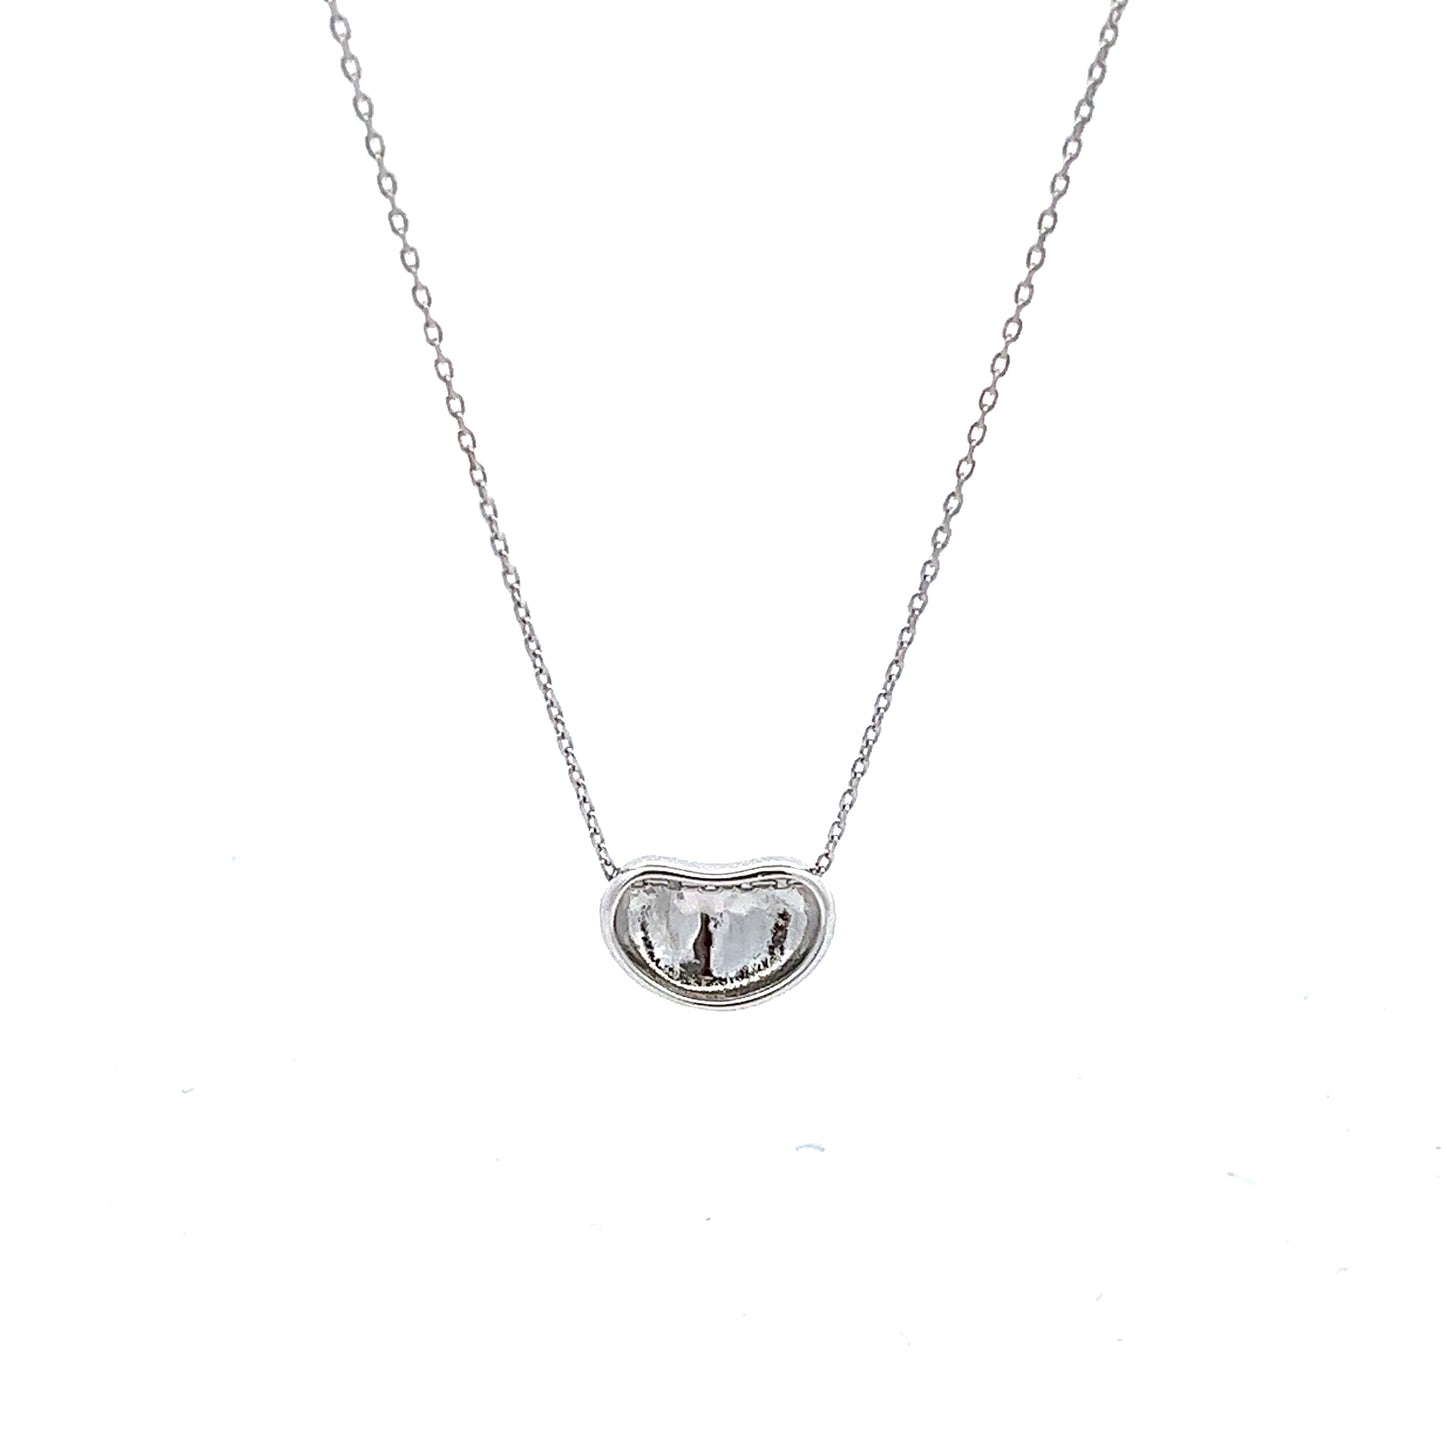 Peaberry Necklace in Silver